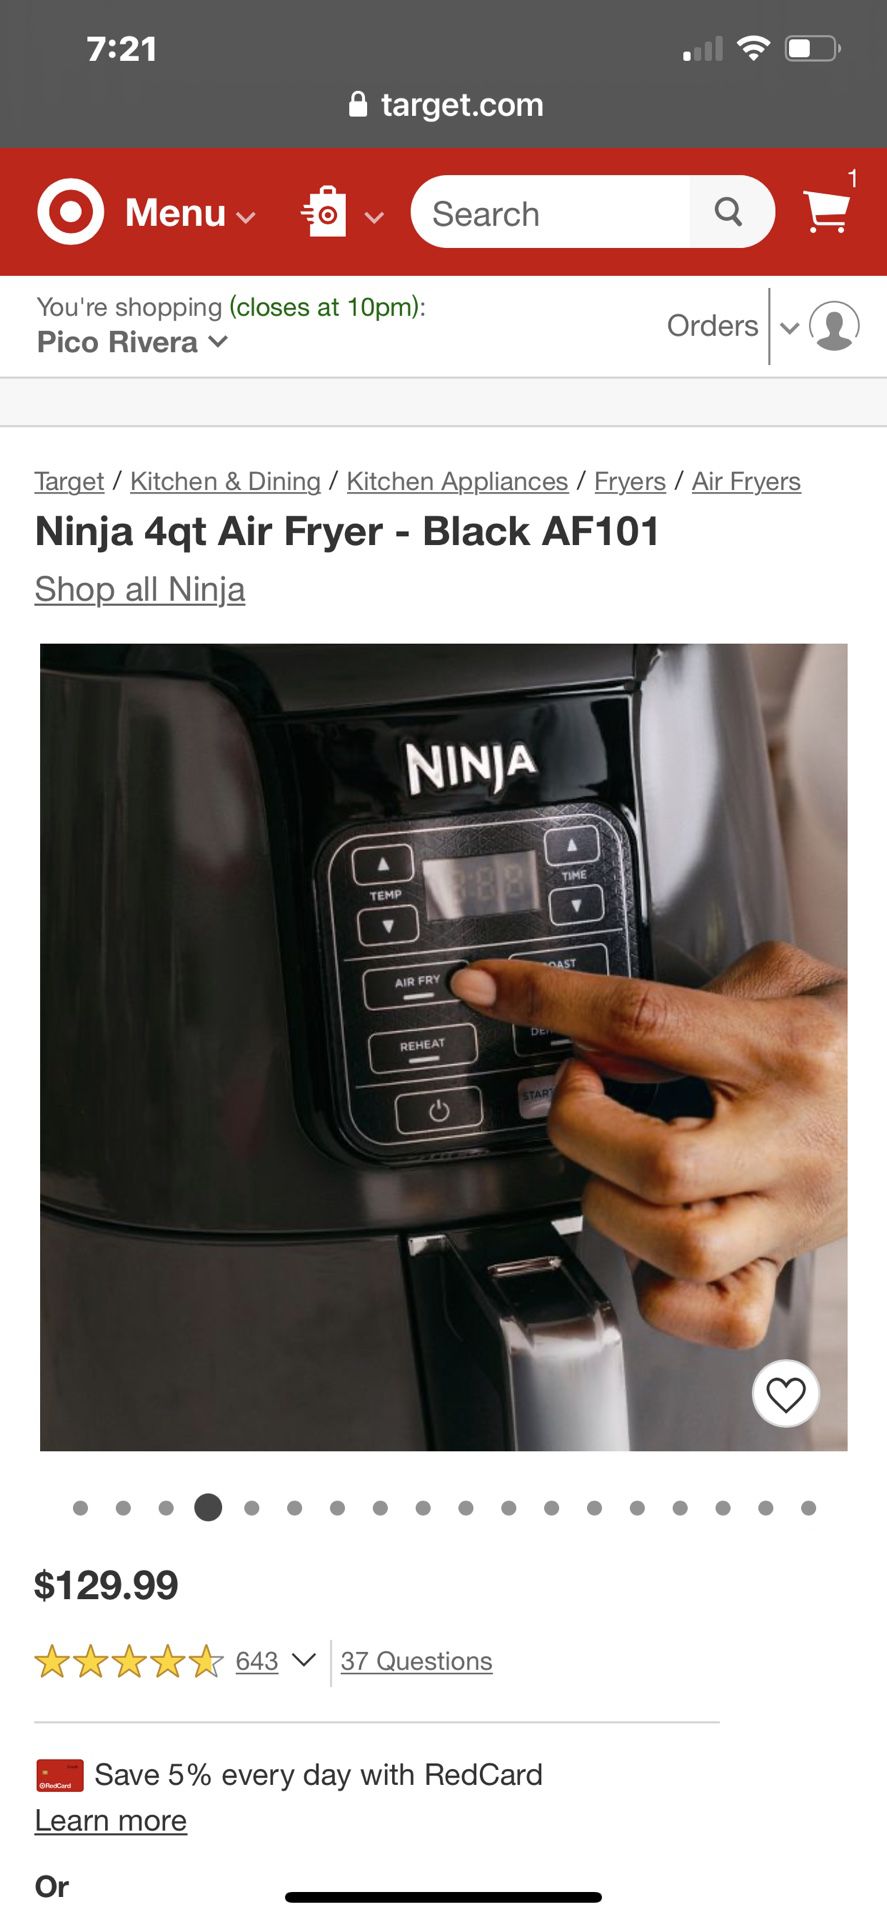 Ninja AF101 Air Fryer that Crisps, Roasts, Reheats, & Dehydrates for Sale  in Irving, TX - OfferUp